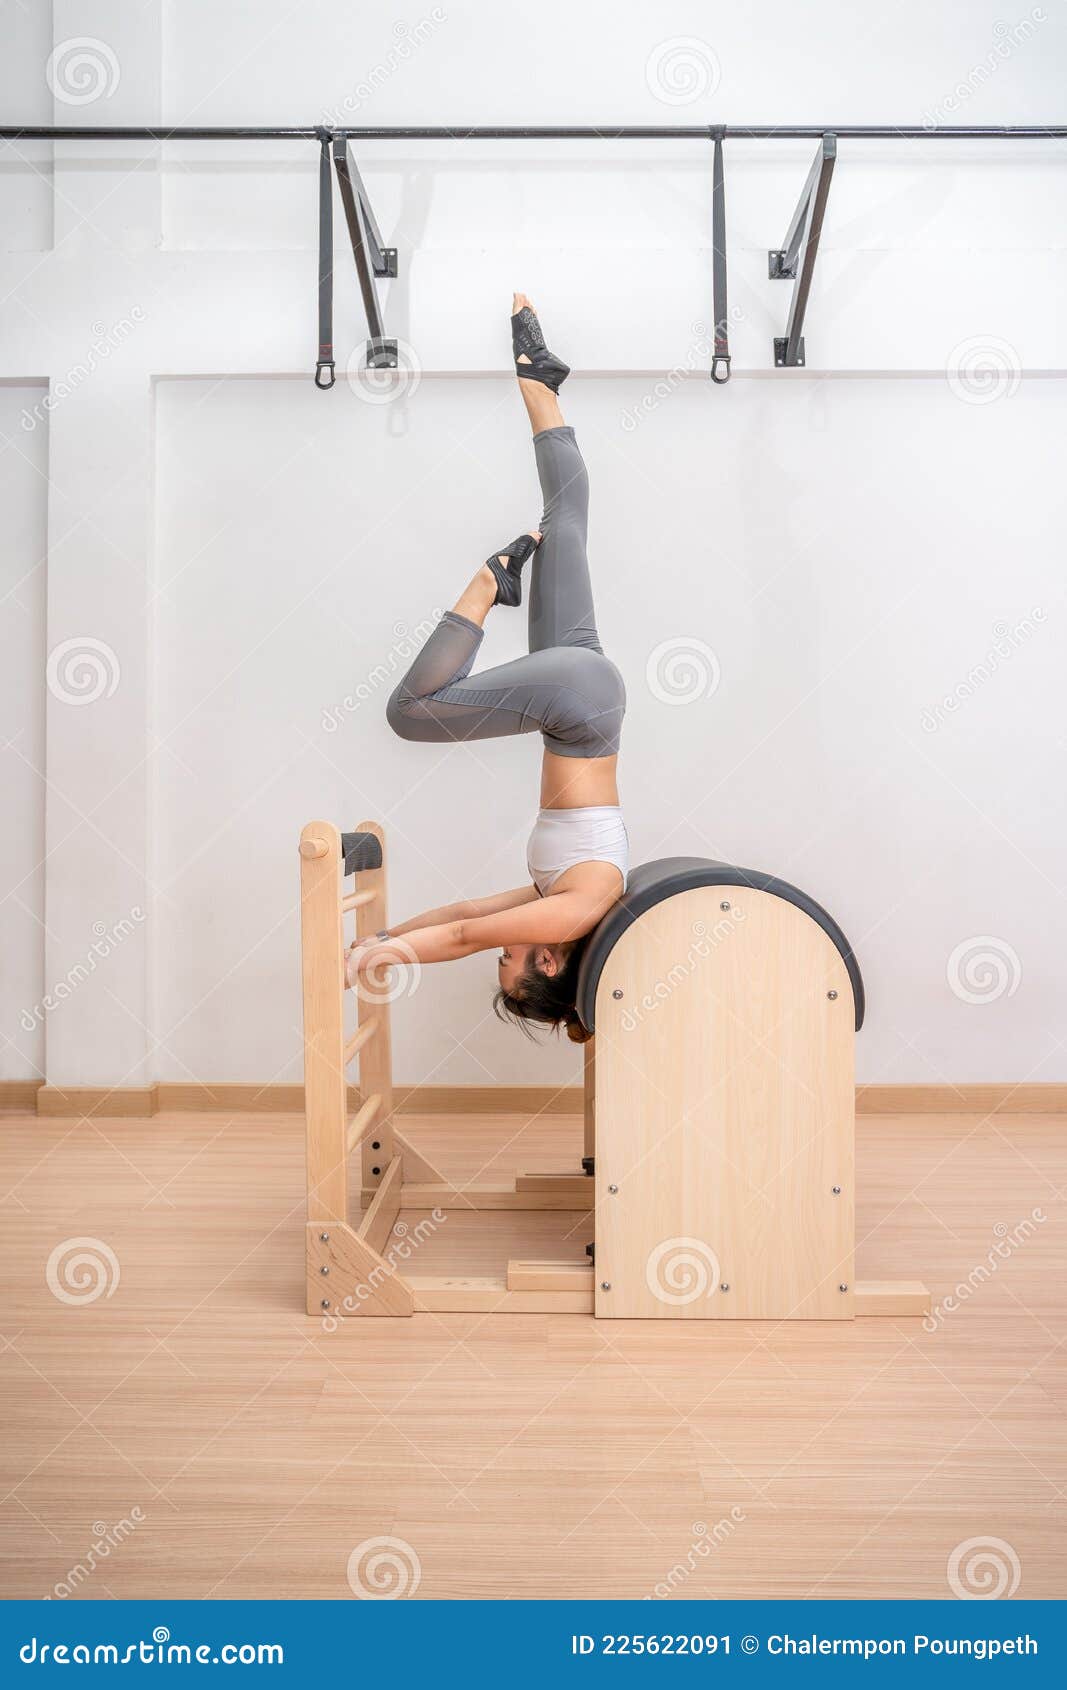 Young Asian Woman Working on Pilates Ladder Barrel Machine during Her  Exercise Training Stock Image - Image of person, cardiovascular: 225622091